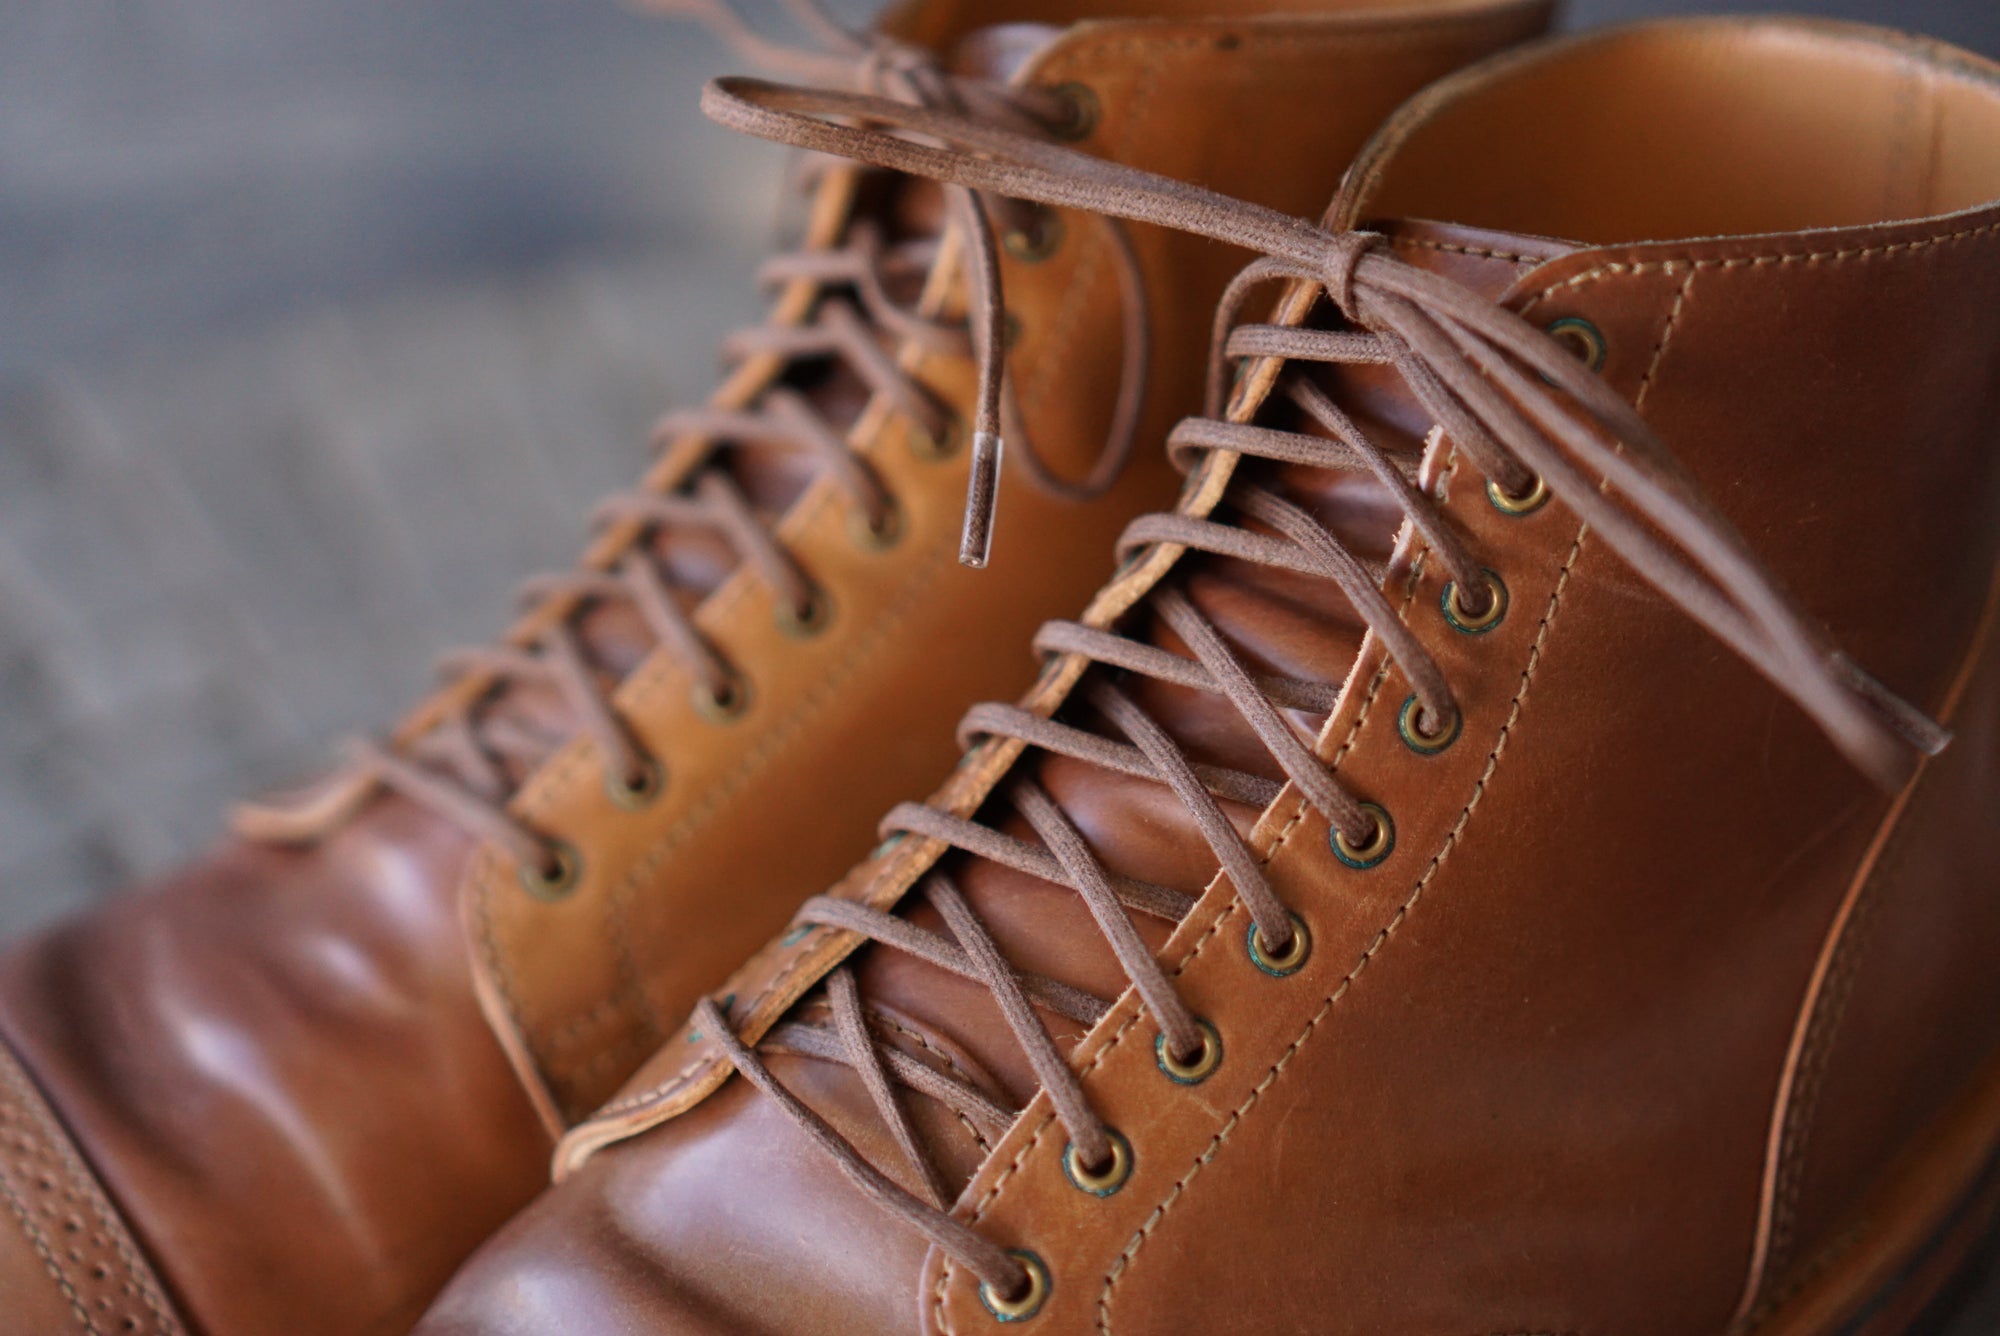 60" Round Cord Waxed Boot Laces